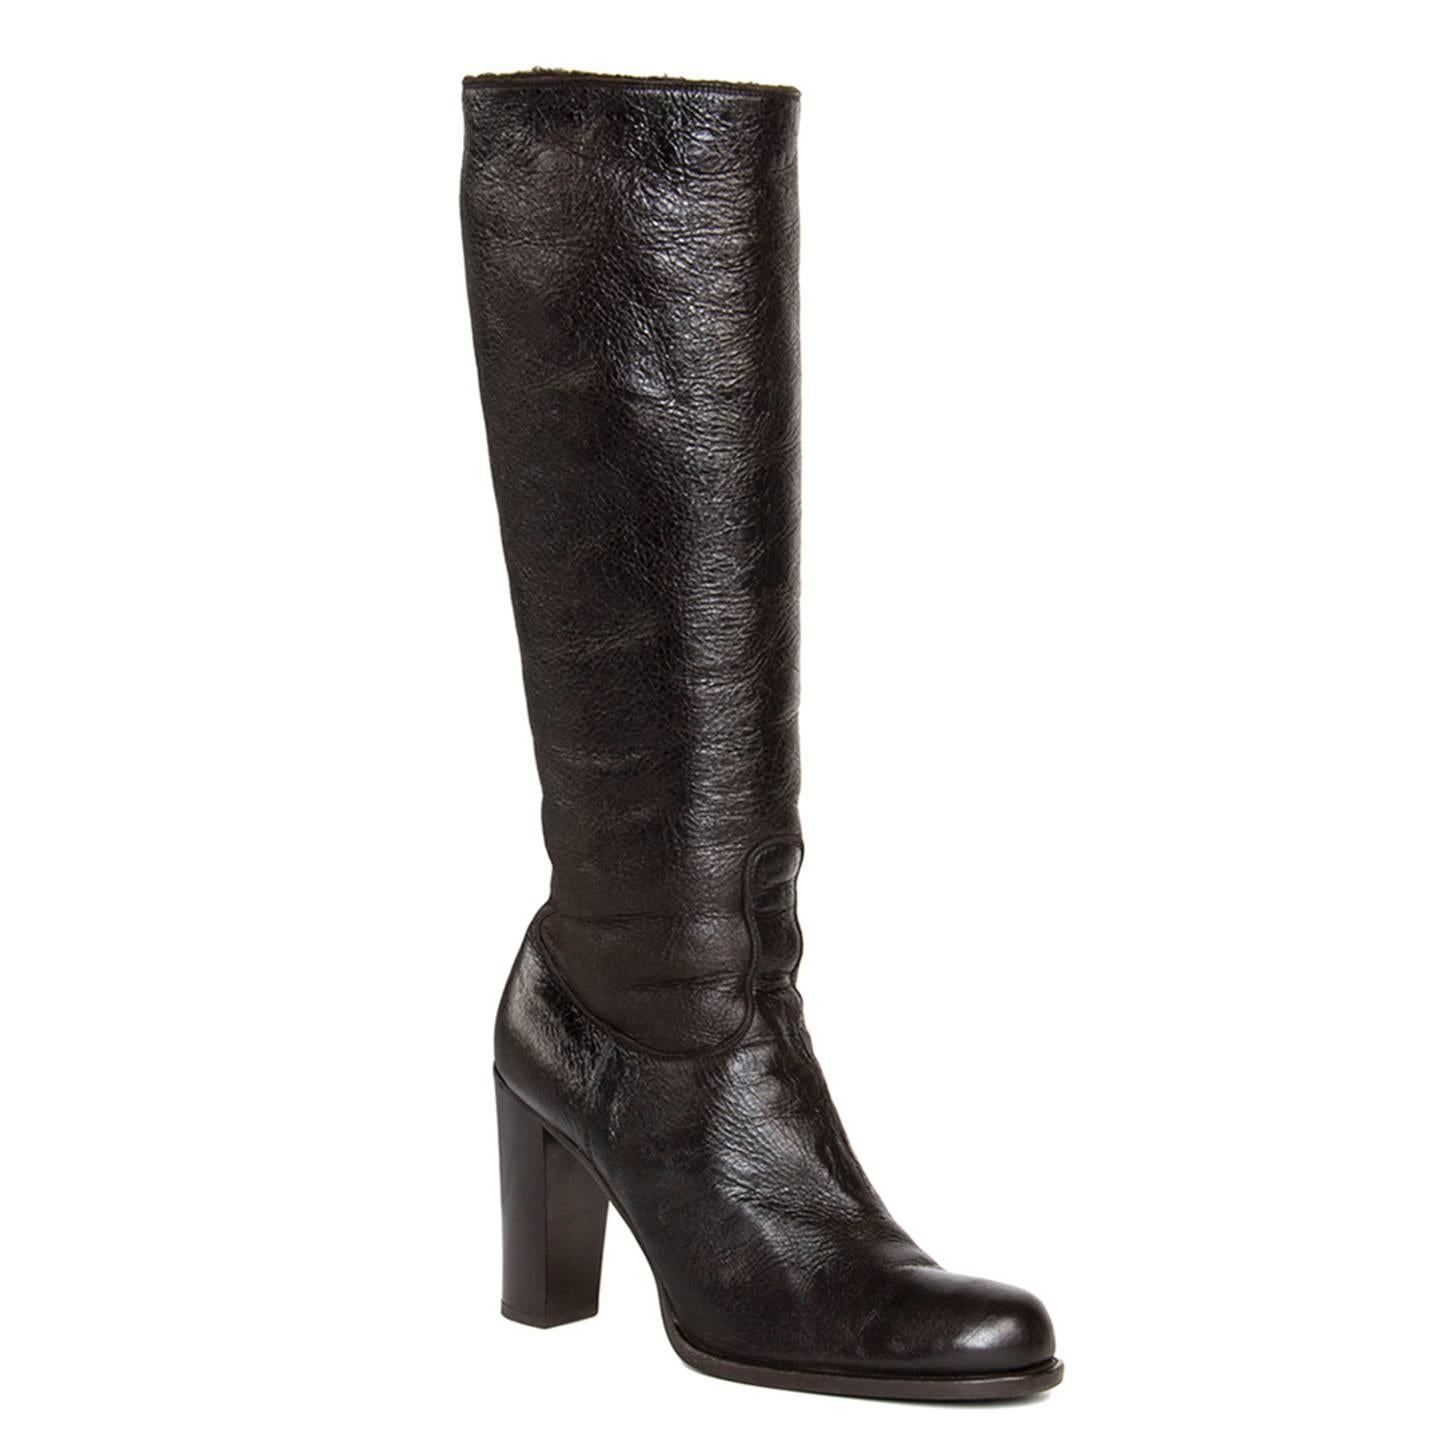 Dark brown leather shearling knee high boots with round toe with instep zipper. Vero cuoio. Made in Italy. Heels 4